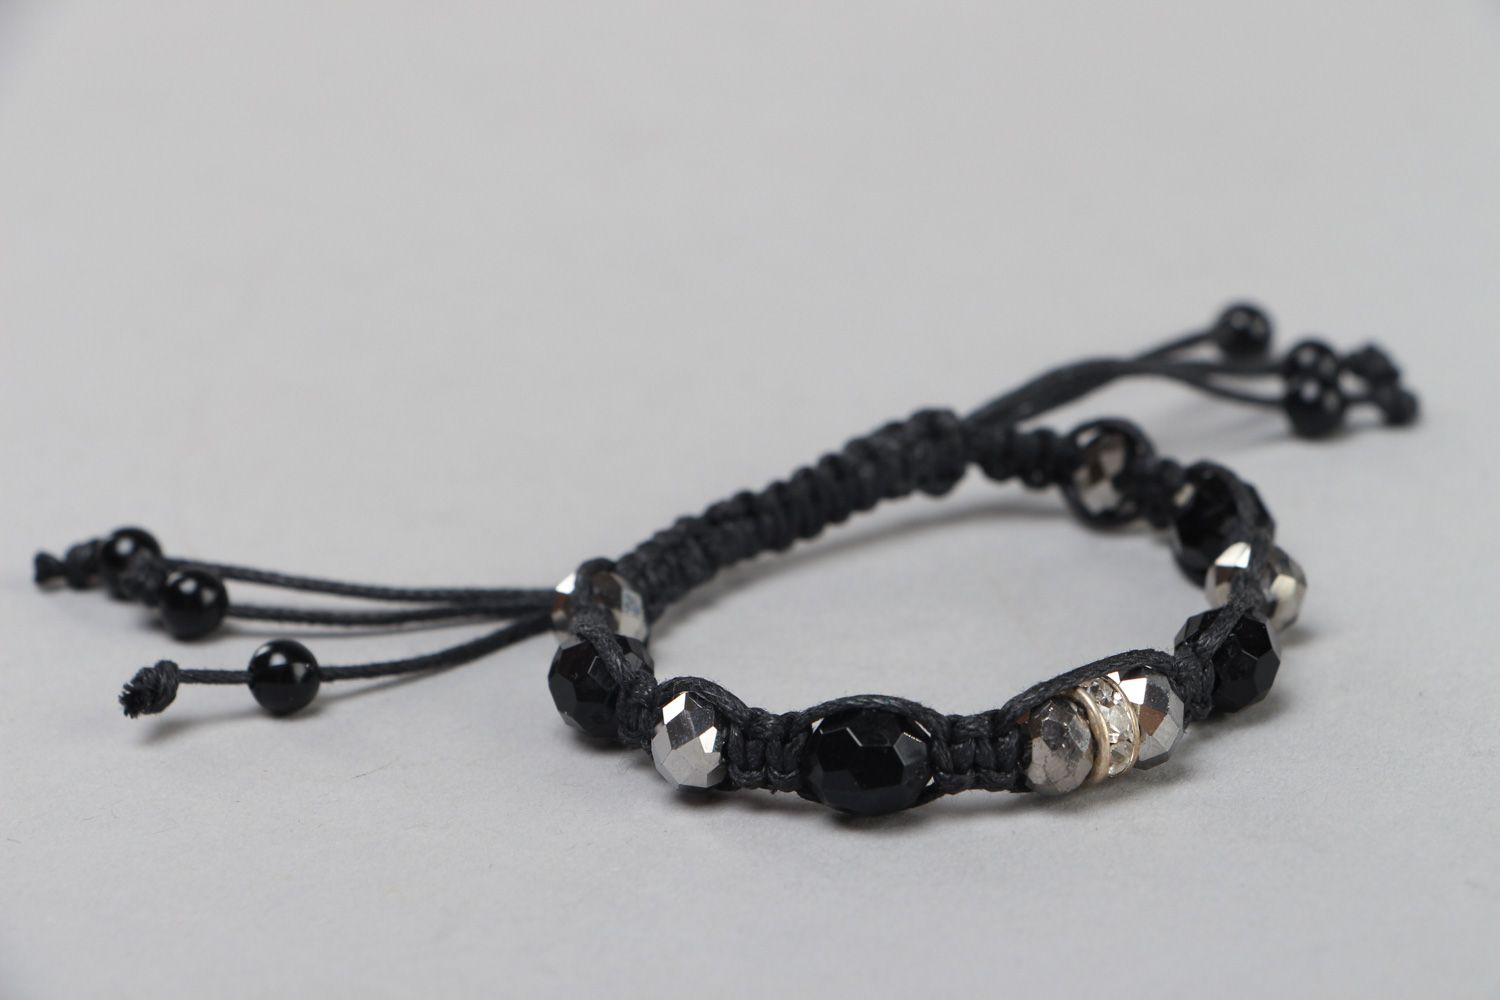 Handmade wrist bracelet woven of waxed cord with glass beads in dark color palette photo 2